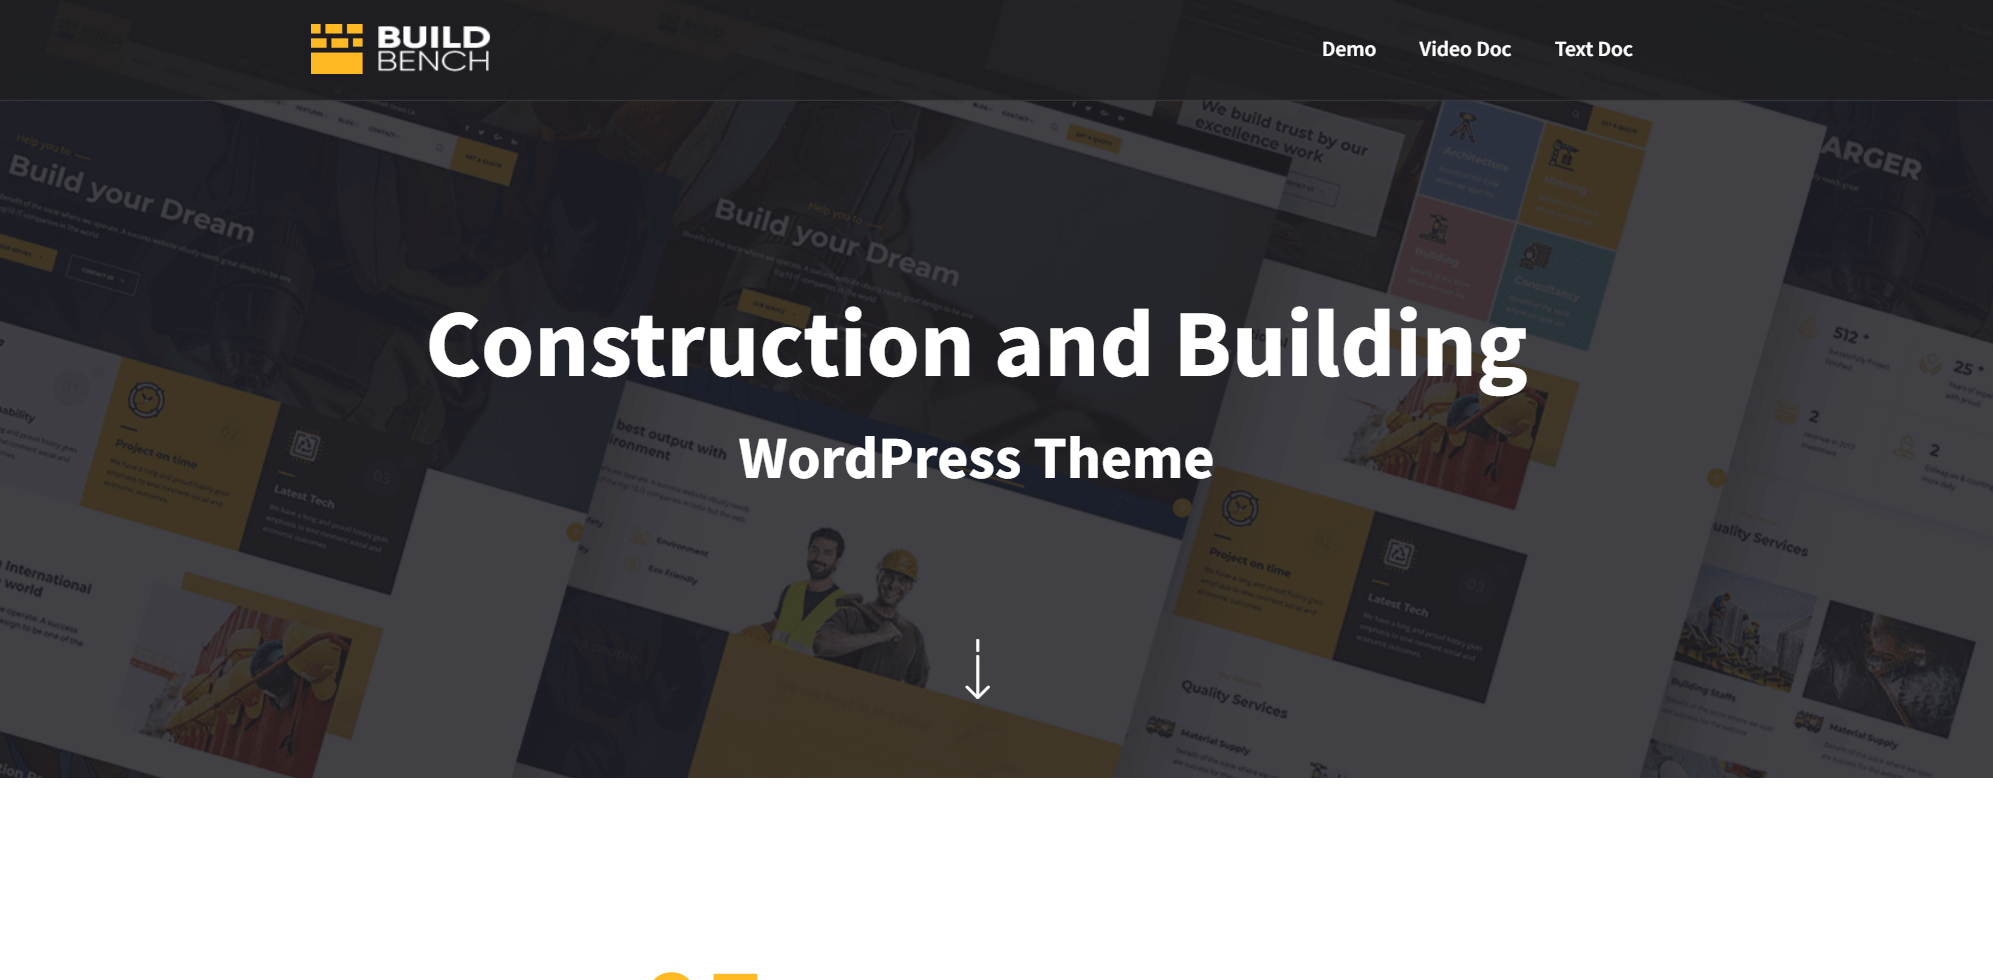 free download Buildbench Construction Building WordPress Theme Nulled